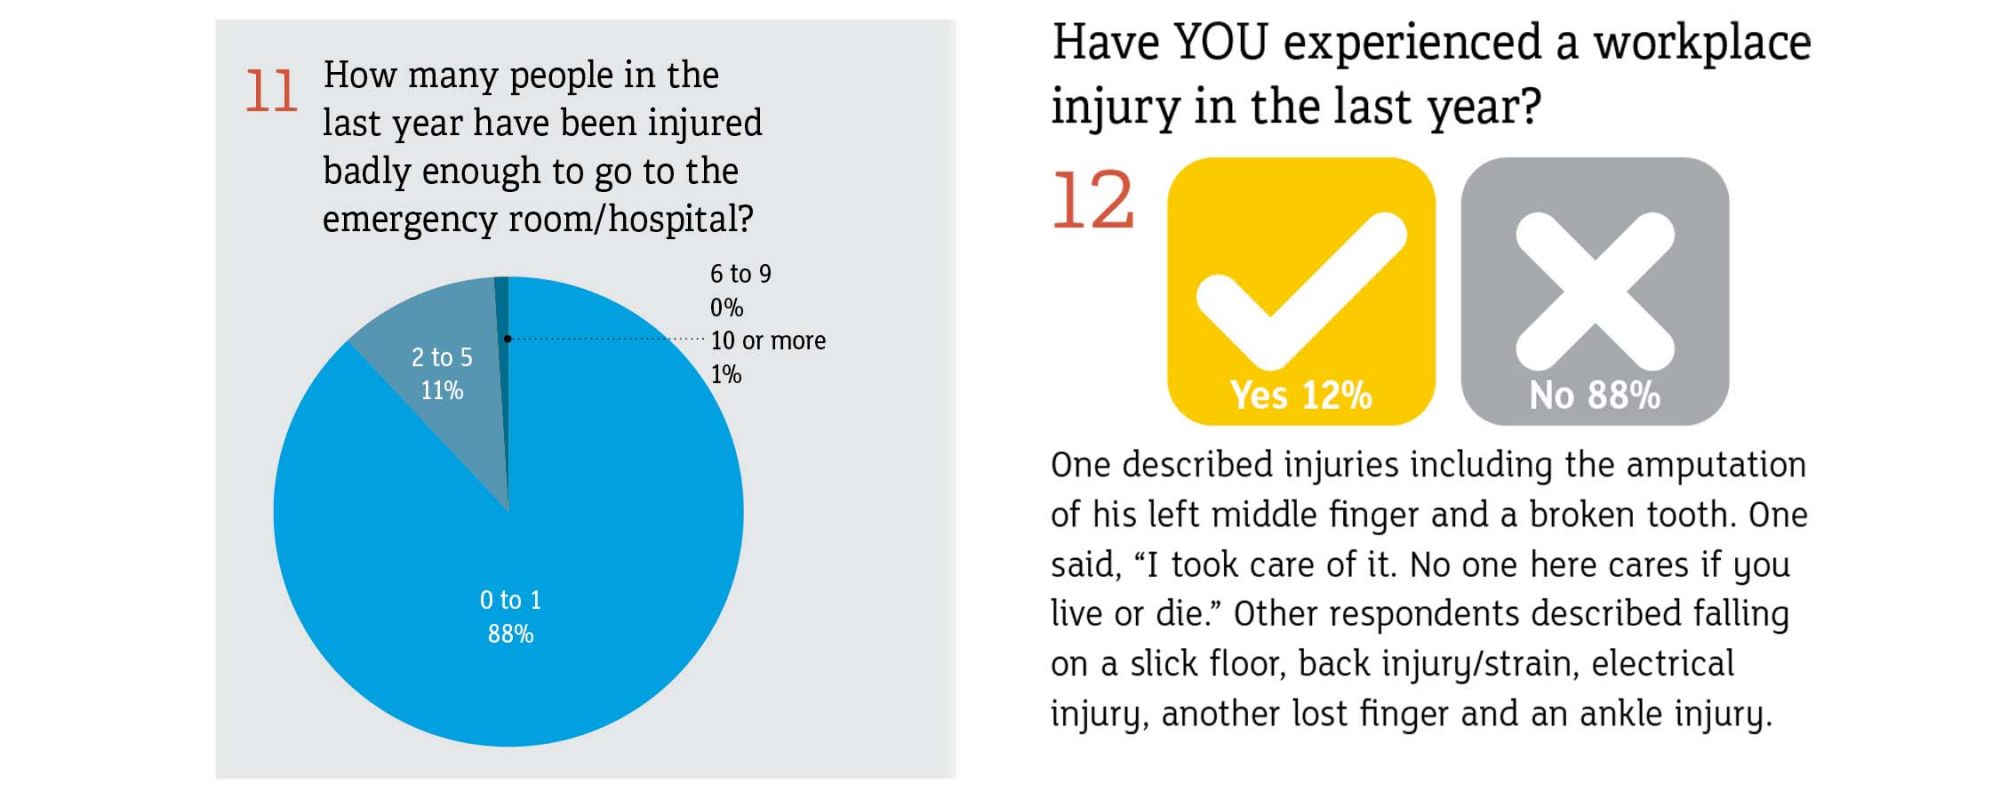 How many people in the last year have been injured badly enough to go to the emergency room/hospital? Have you experienced a workplace injury in the last year?